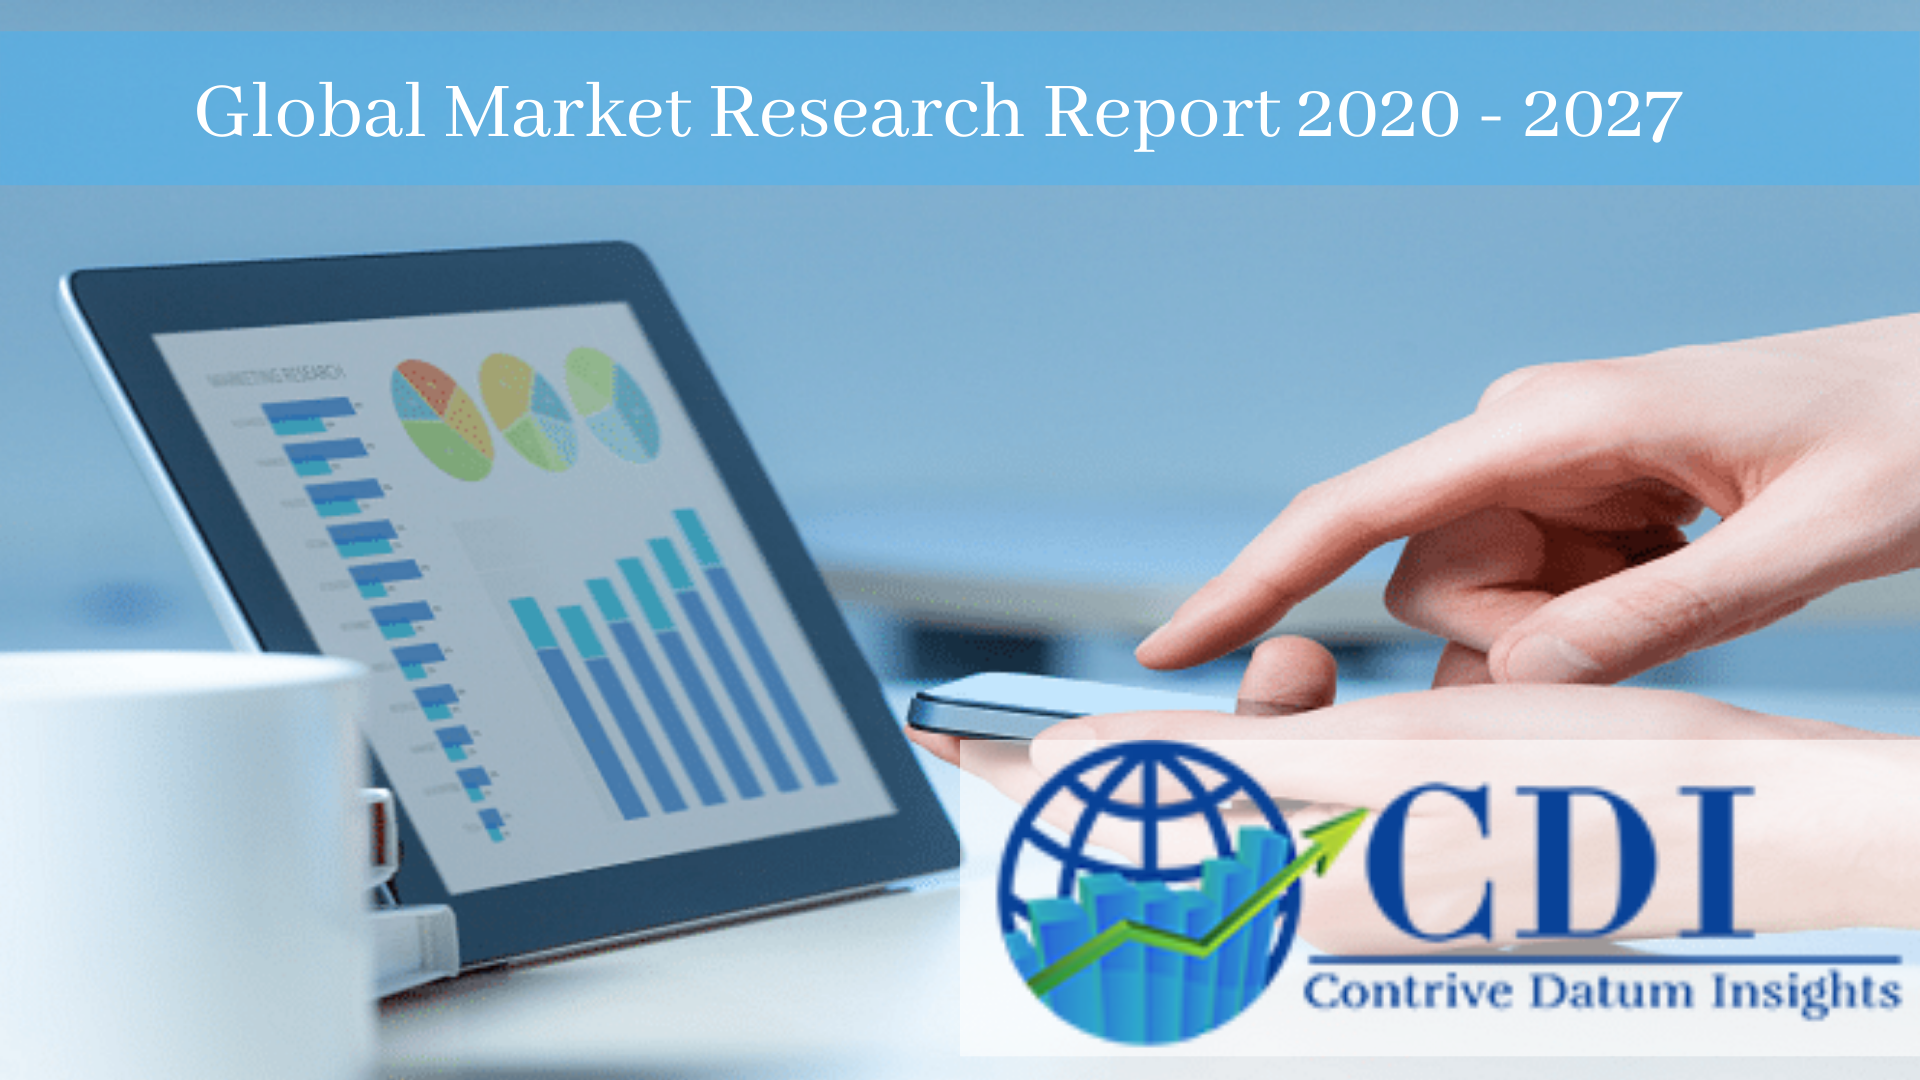 Fruit & Vegetable Processing Enzymes Market Size, share, Analysis and Forecast 2027 | Advanced Enzymes, Amano Enzyme, Associated British Foods, Biocatalysts